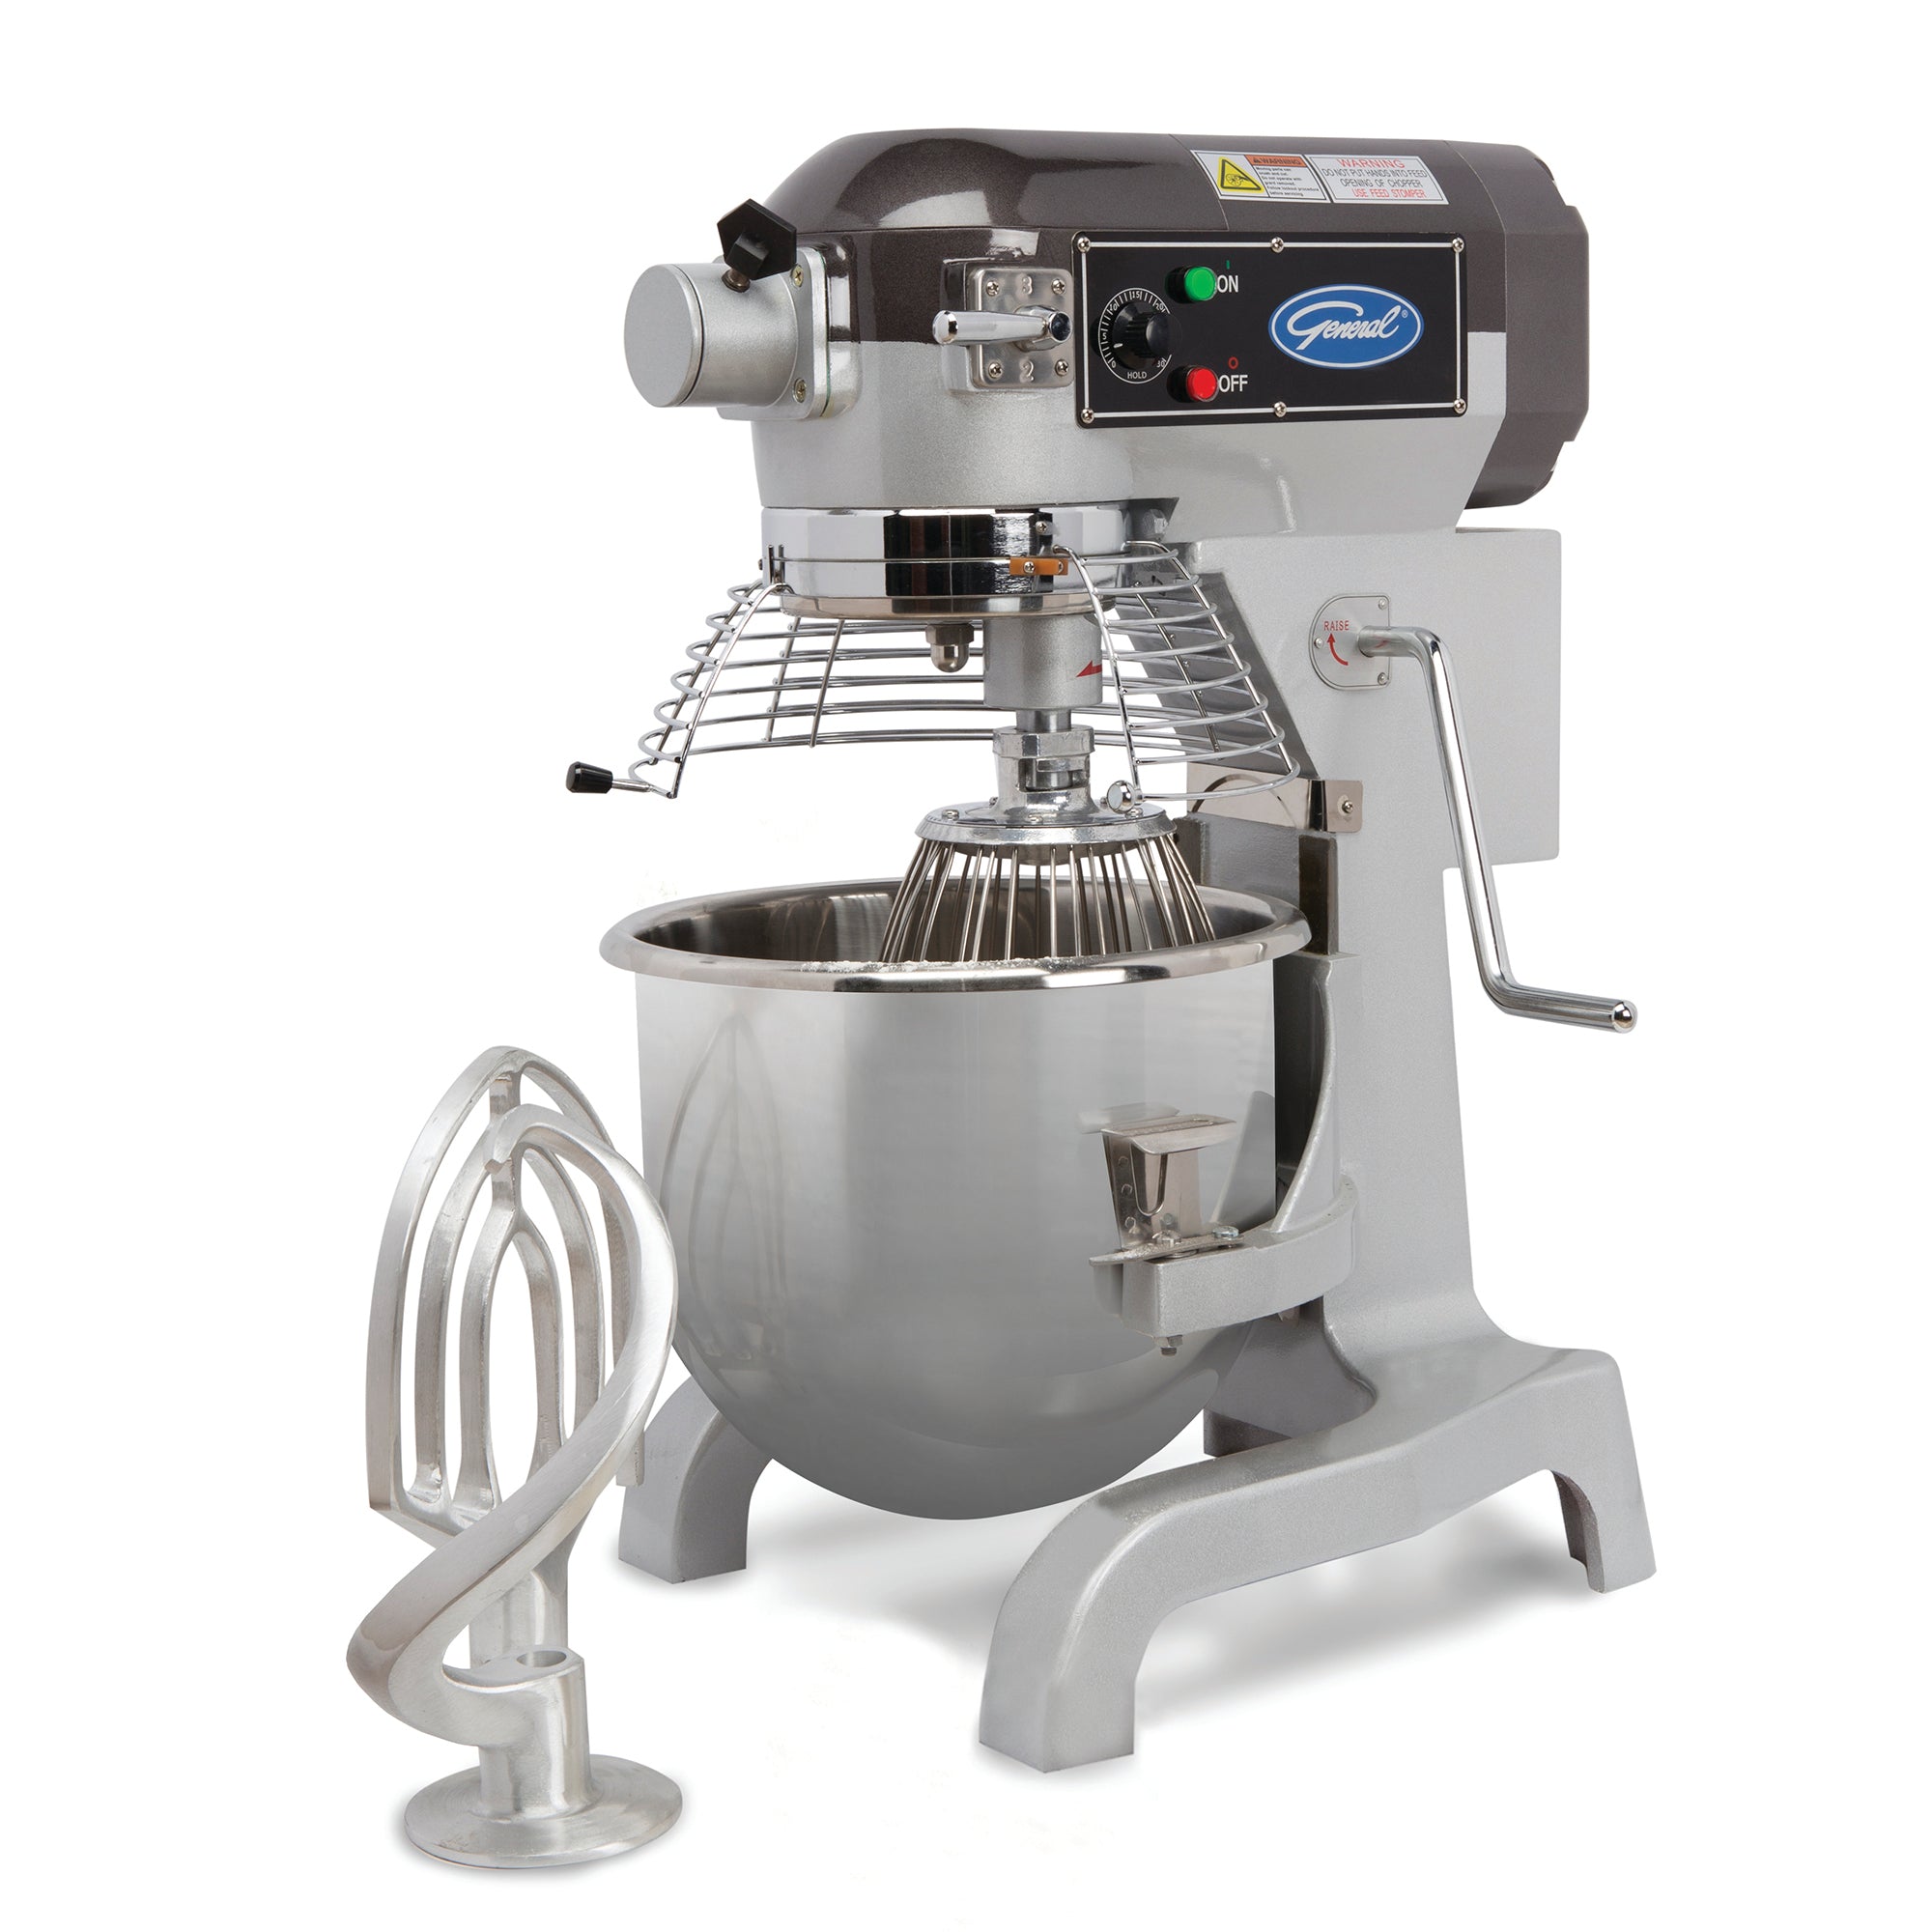 Spiral mixer with fixed head 25kg GH 30 - Planet Chef Foodservice